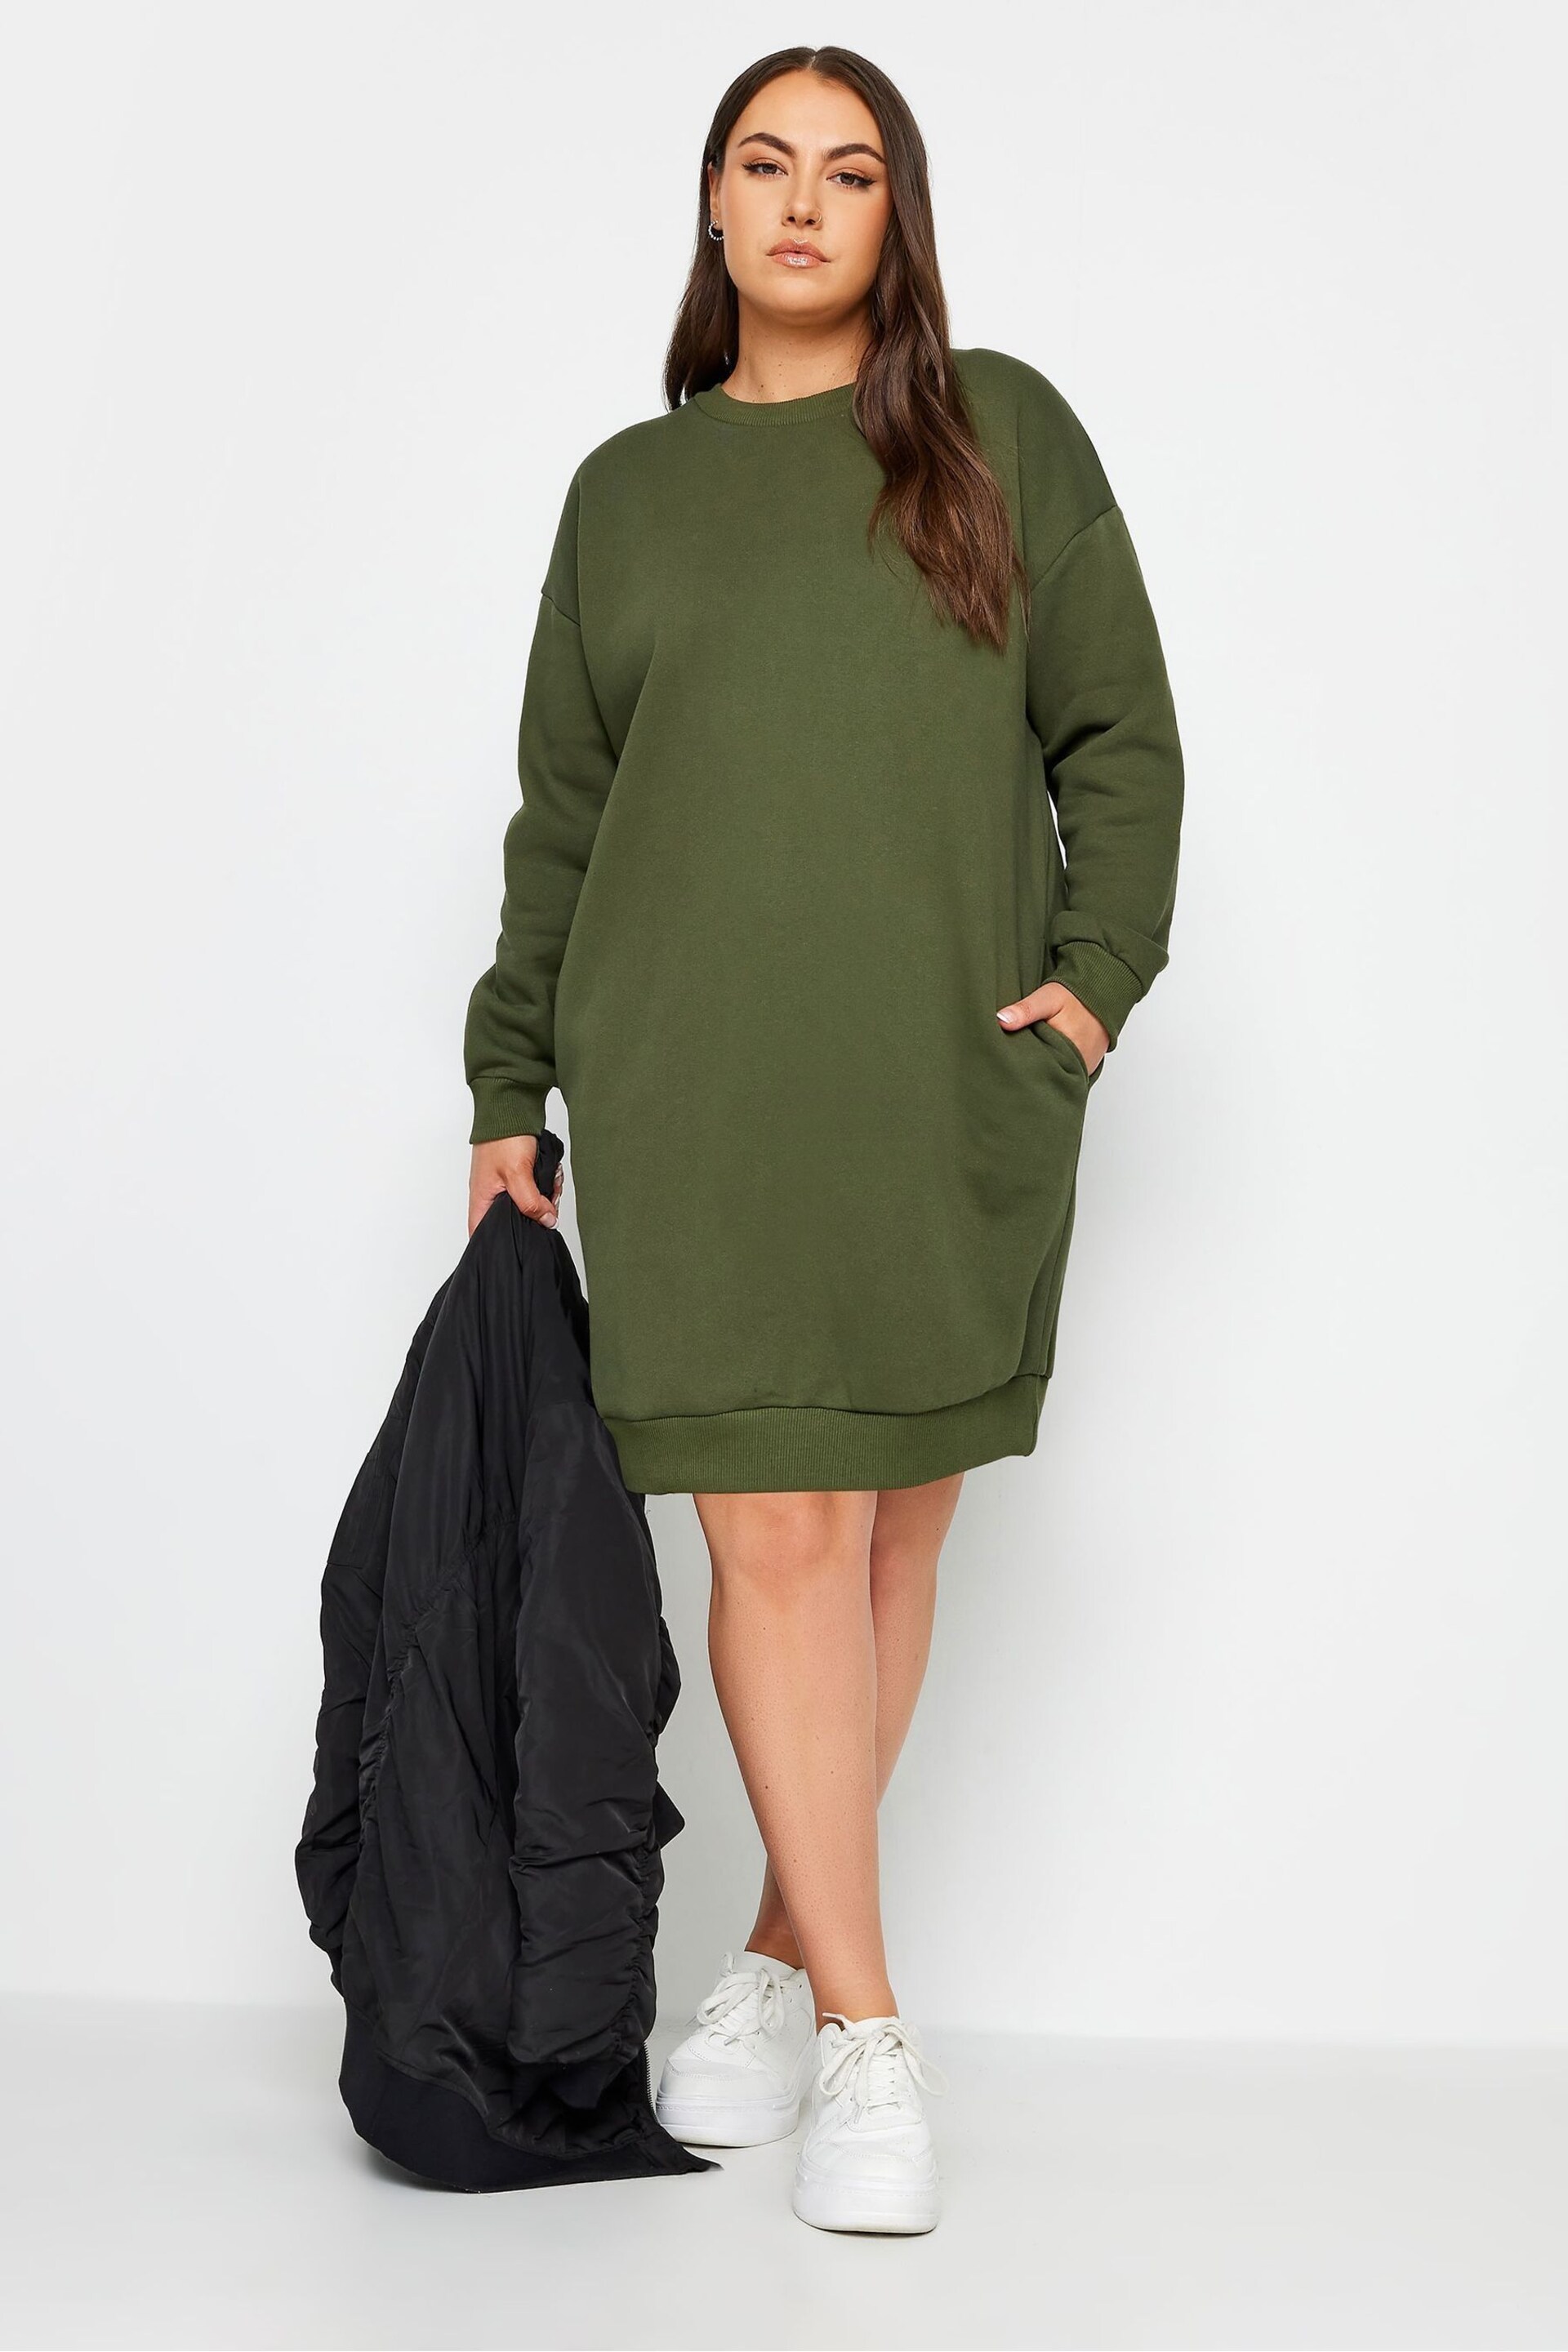 Yours Curve Green Sweat Tunic Dress - Image 2 of 4